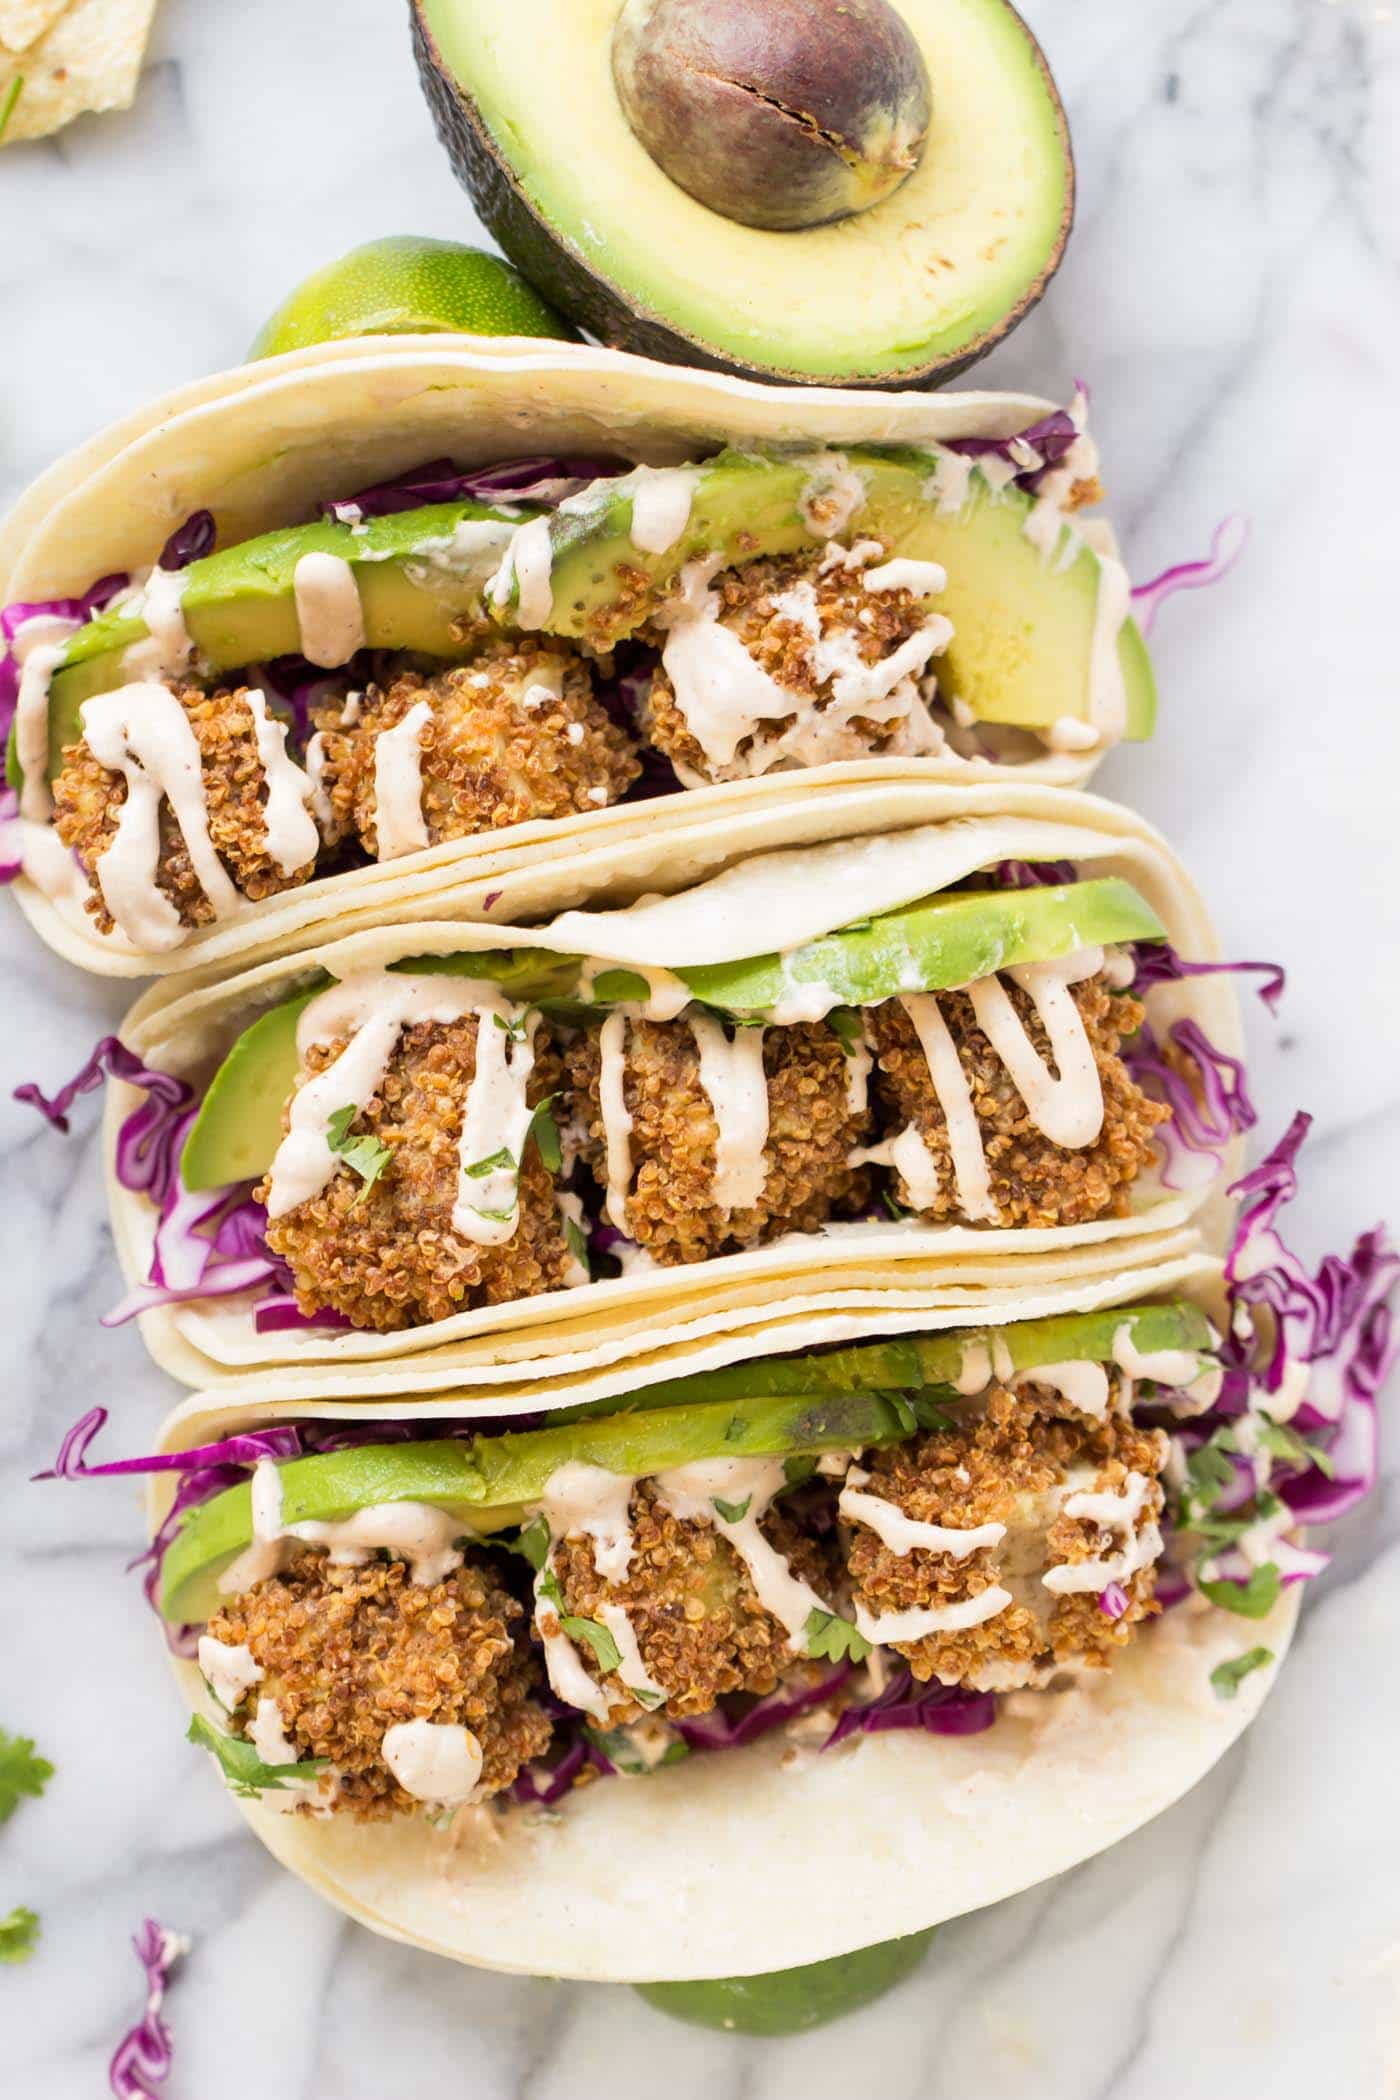 These crispy tofu tacos are AMAZING! not to mention they're actually healthy too - no frying, no gluten and no dairy!